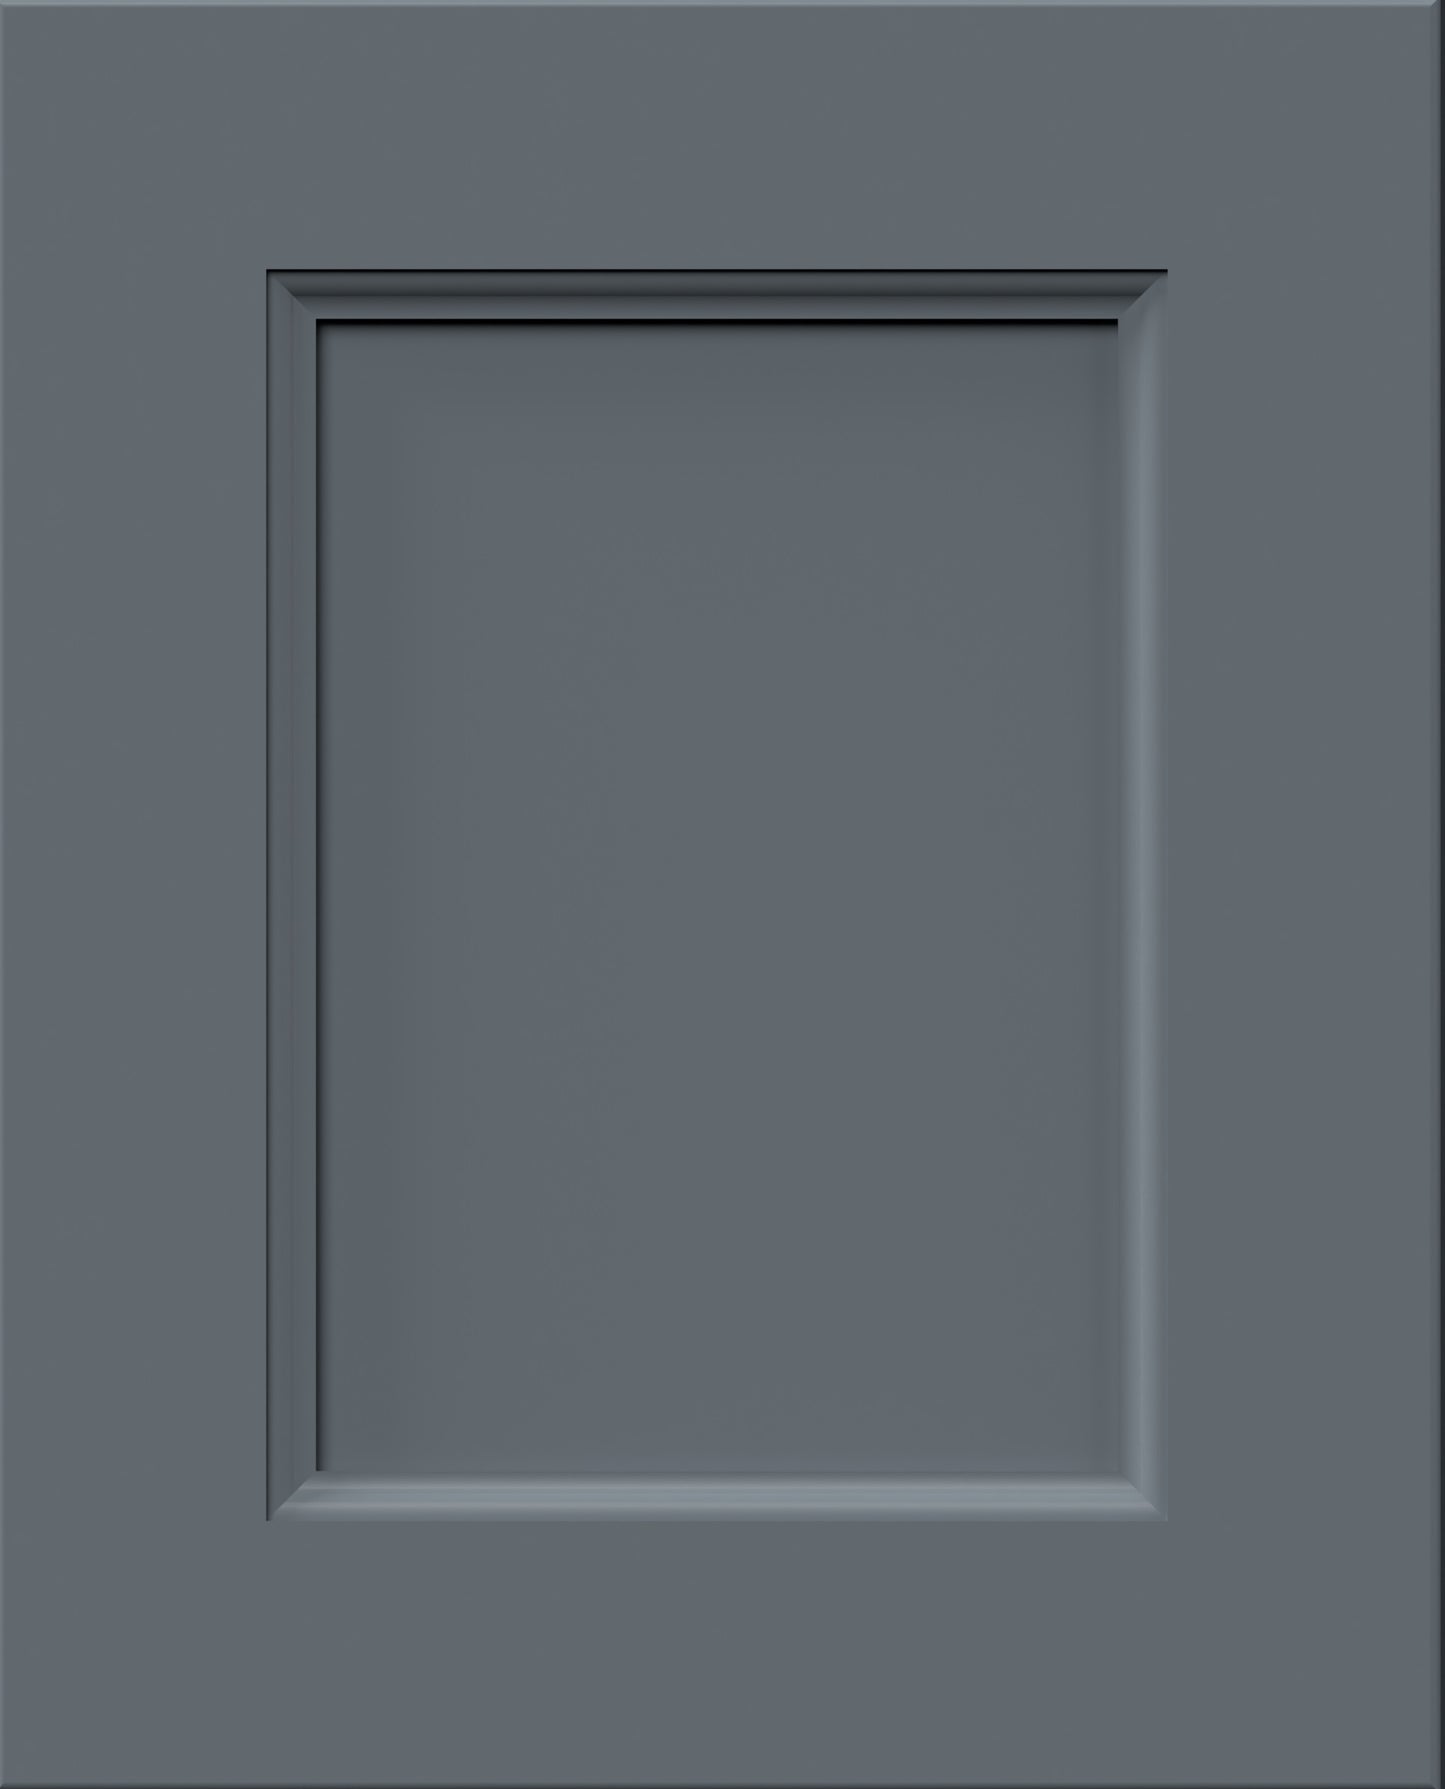 Nexus denim blue small sample door. Recessed cabinet door with an inner detail in a powdery light blue painted finish.